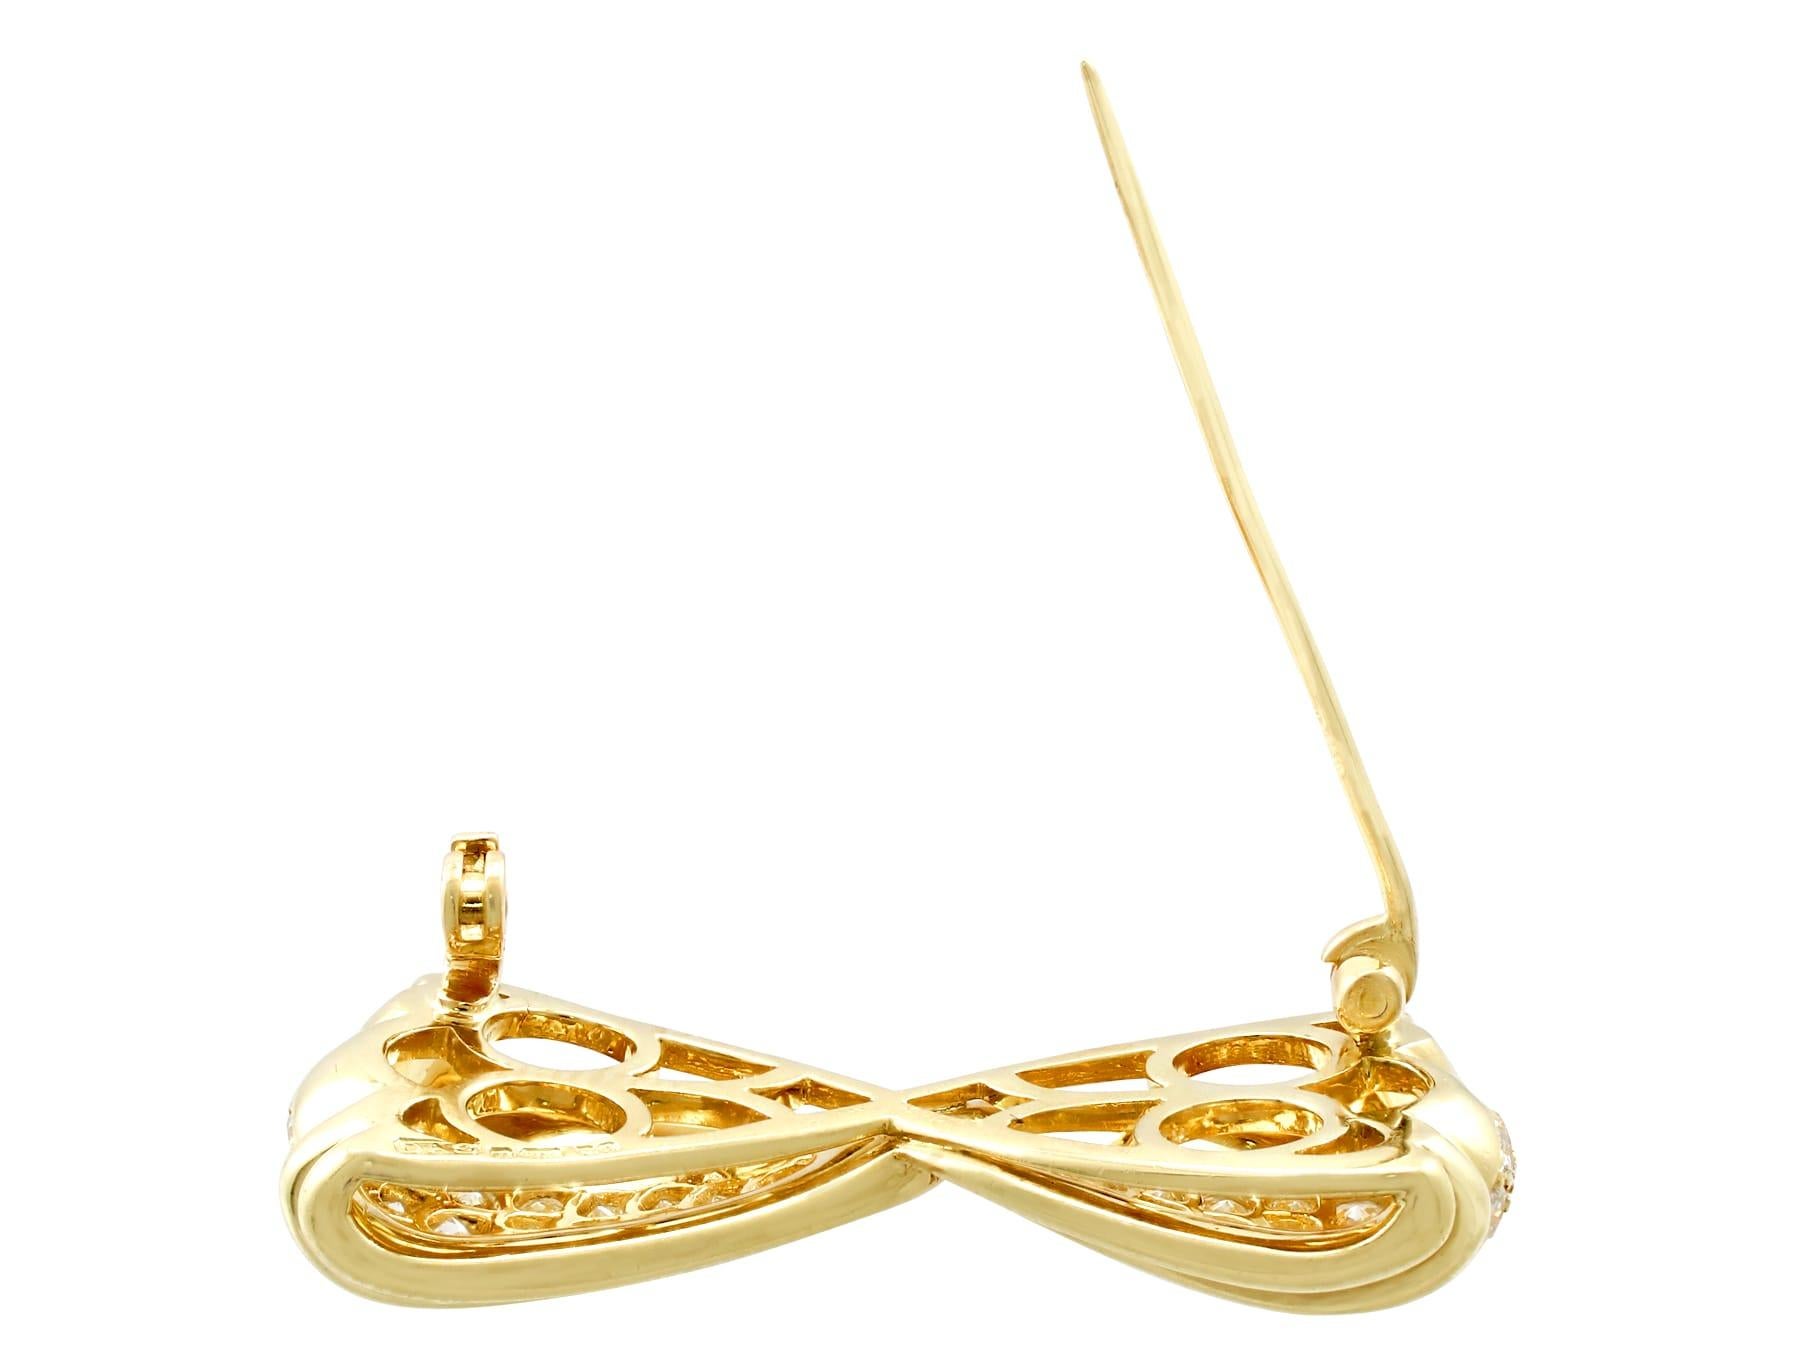 Women's Vintage 1980s 1.68 Carat Diamond and Yellow Gold Bow Brooch For Sale